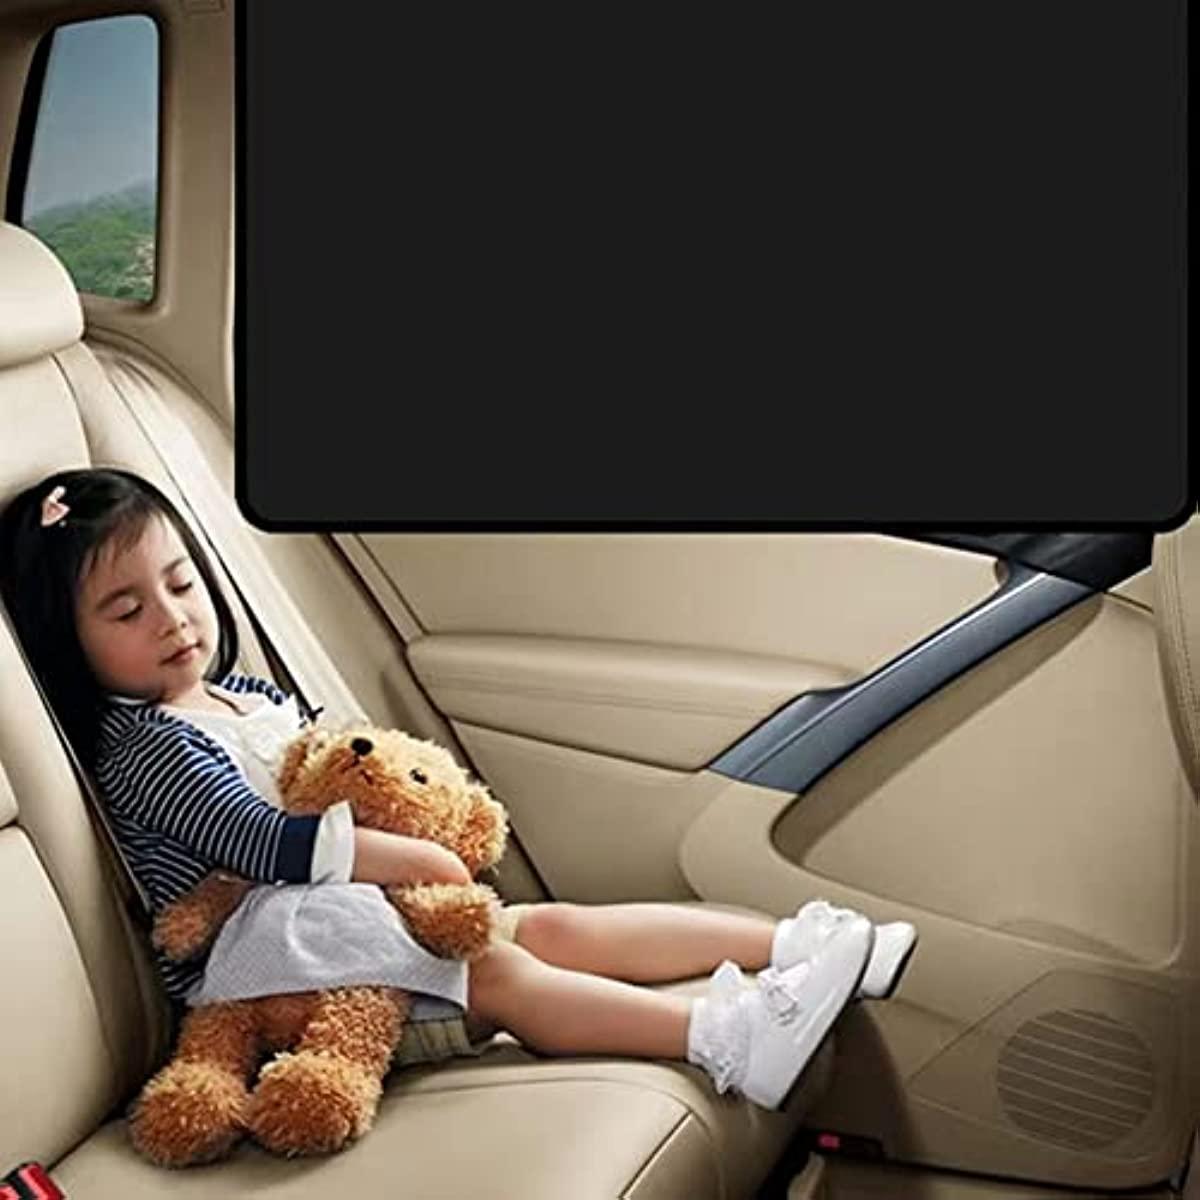 Car Side Window Sun Shades, Window Sunshades Privacy Curtains, 100% Block Light for Breastfeeding, Taking a nap, Changing Clothes, Camping - KinglyDay